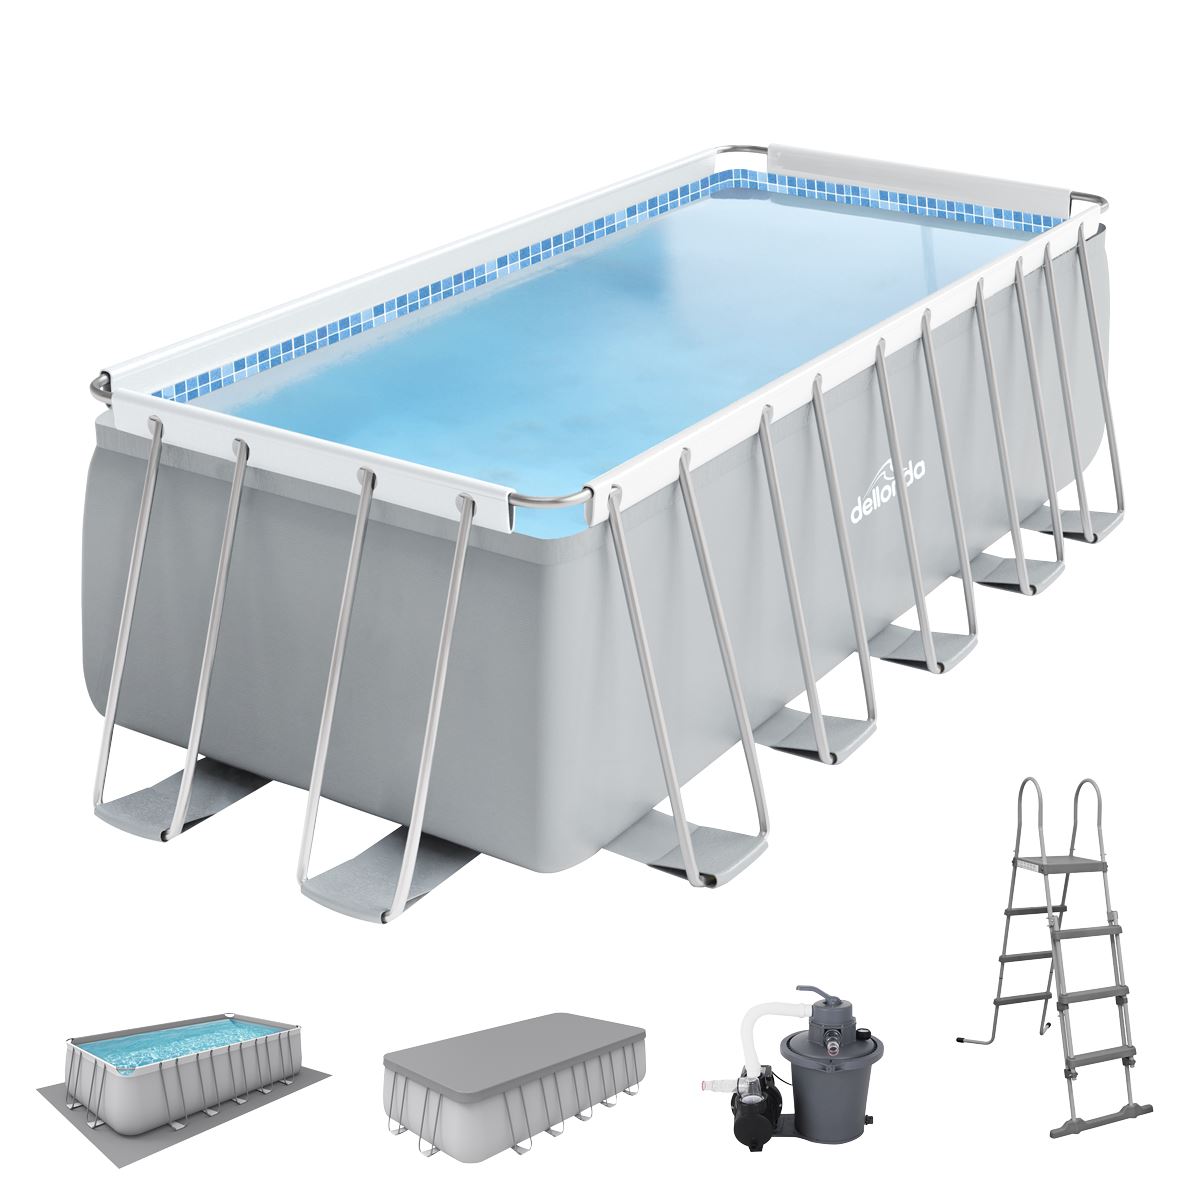 Dellonda 21ft Deluxe Steel Frame Swimming Pool, Rectangular with Step Ladder, Pool and Ground Covers and Filter Sand Pump